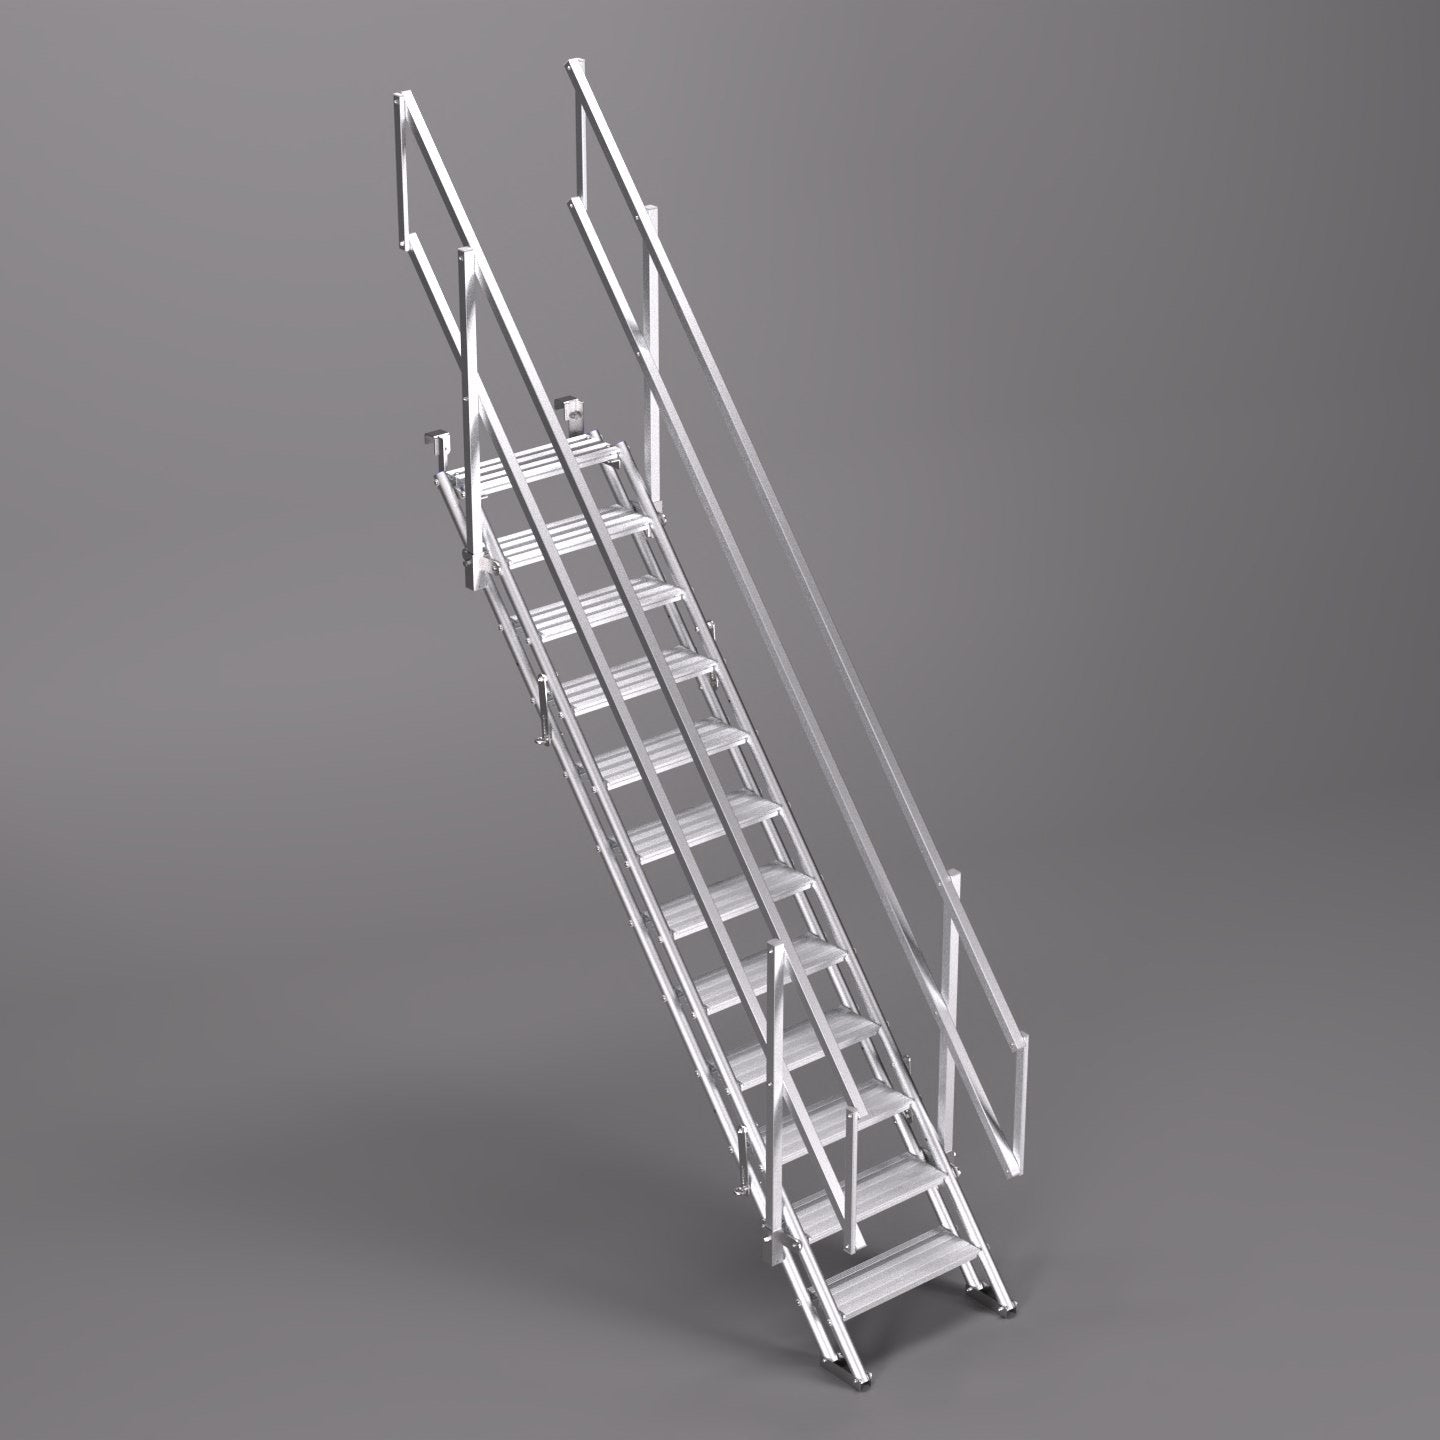 An image of a 2.5m ALTO Universal Stair Set with the scaffold tube hook option.